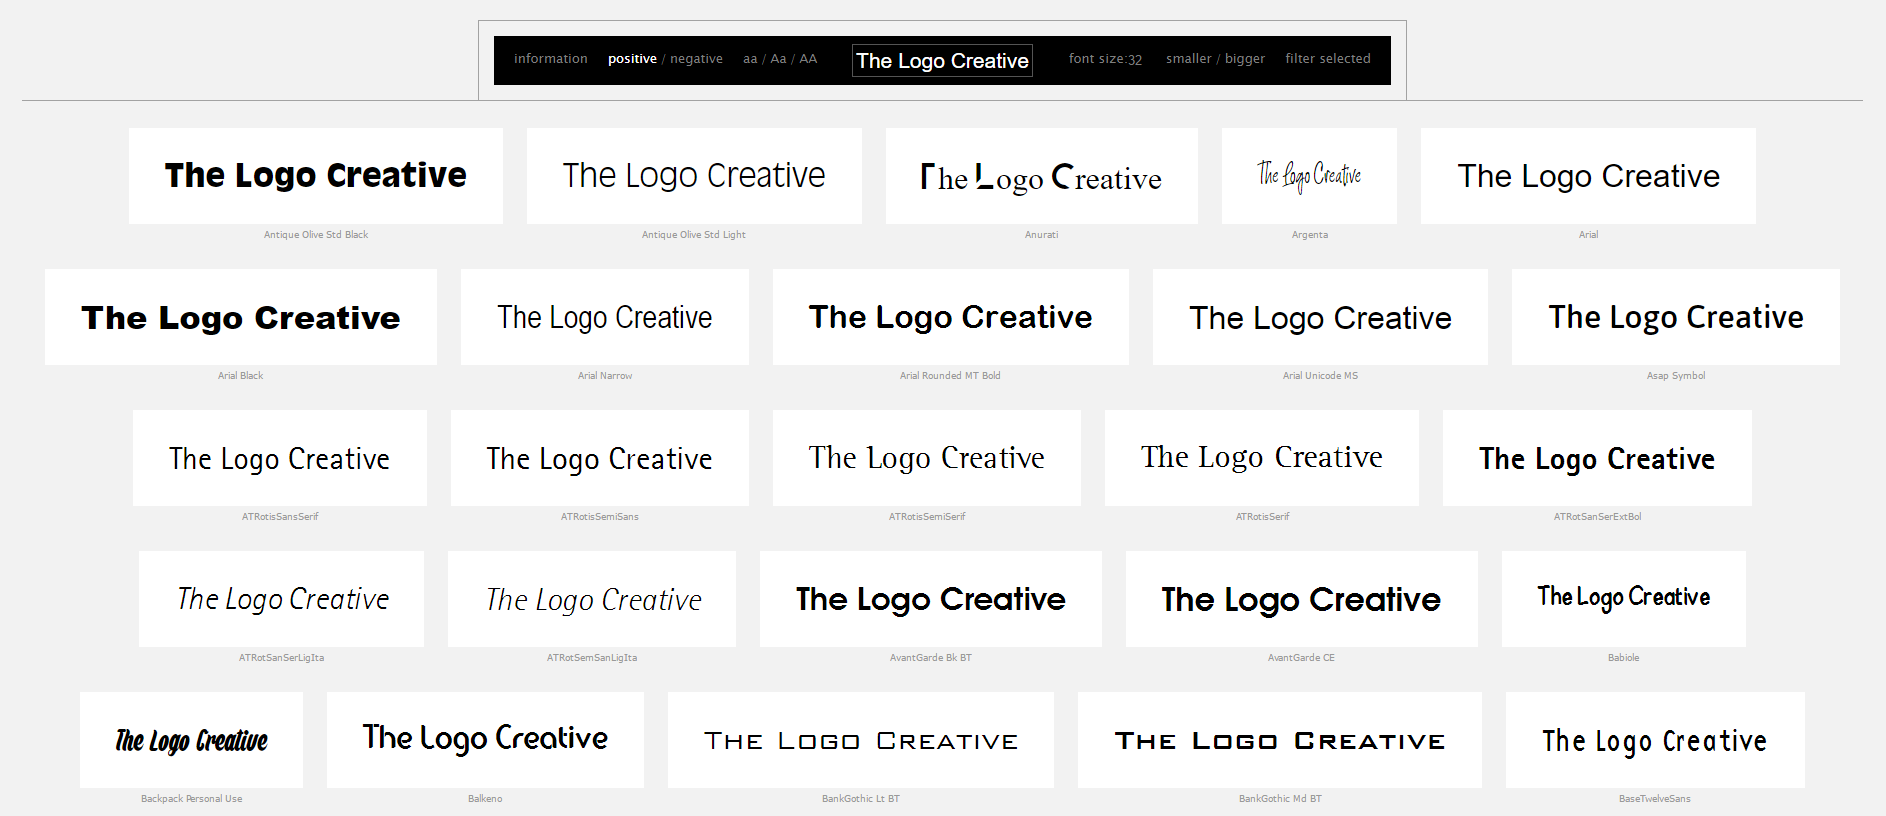 How to Choose the Best Typeface for Your Wordmark Logo